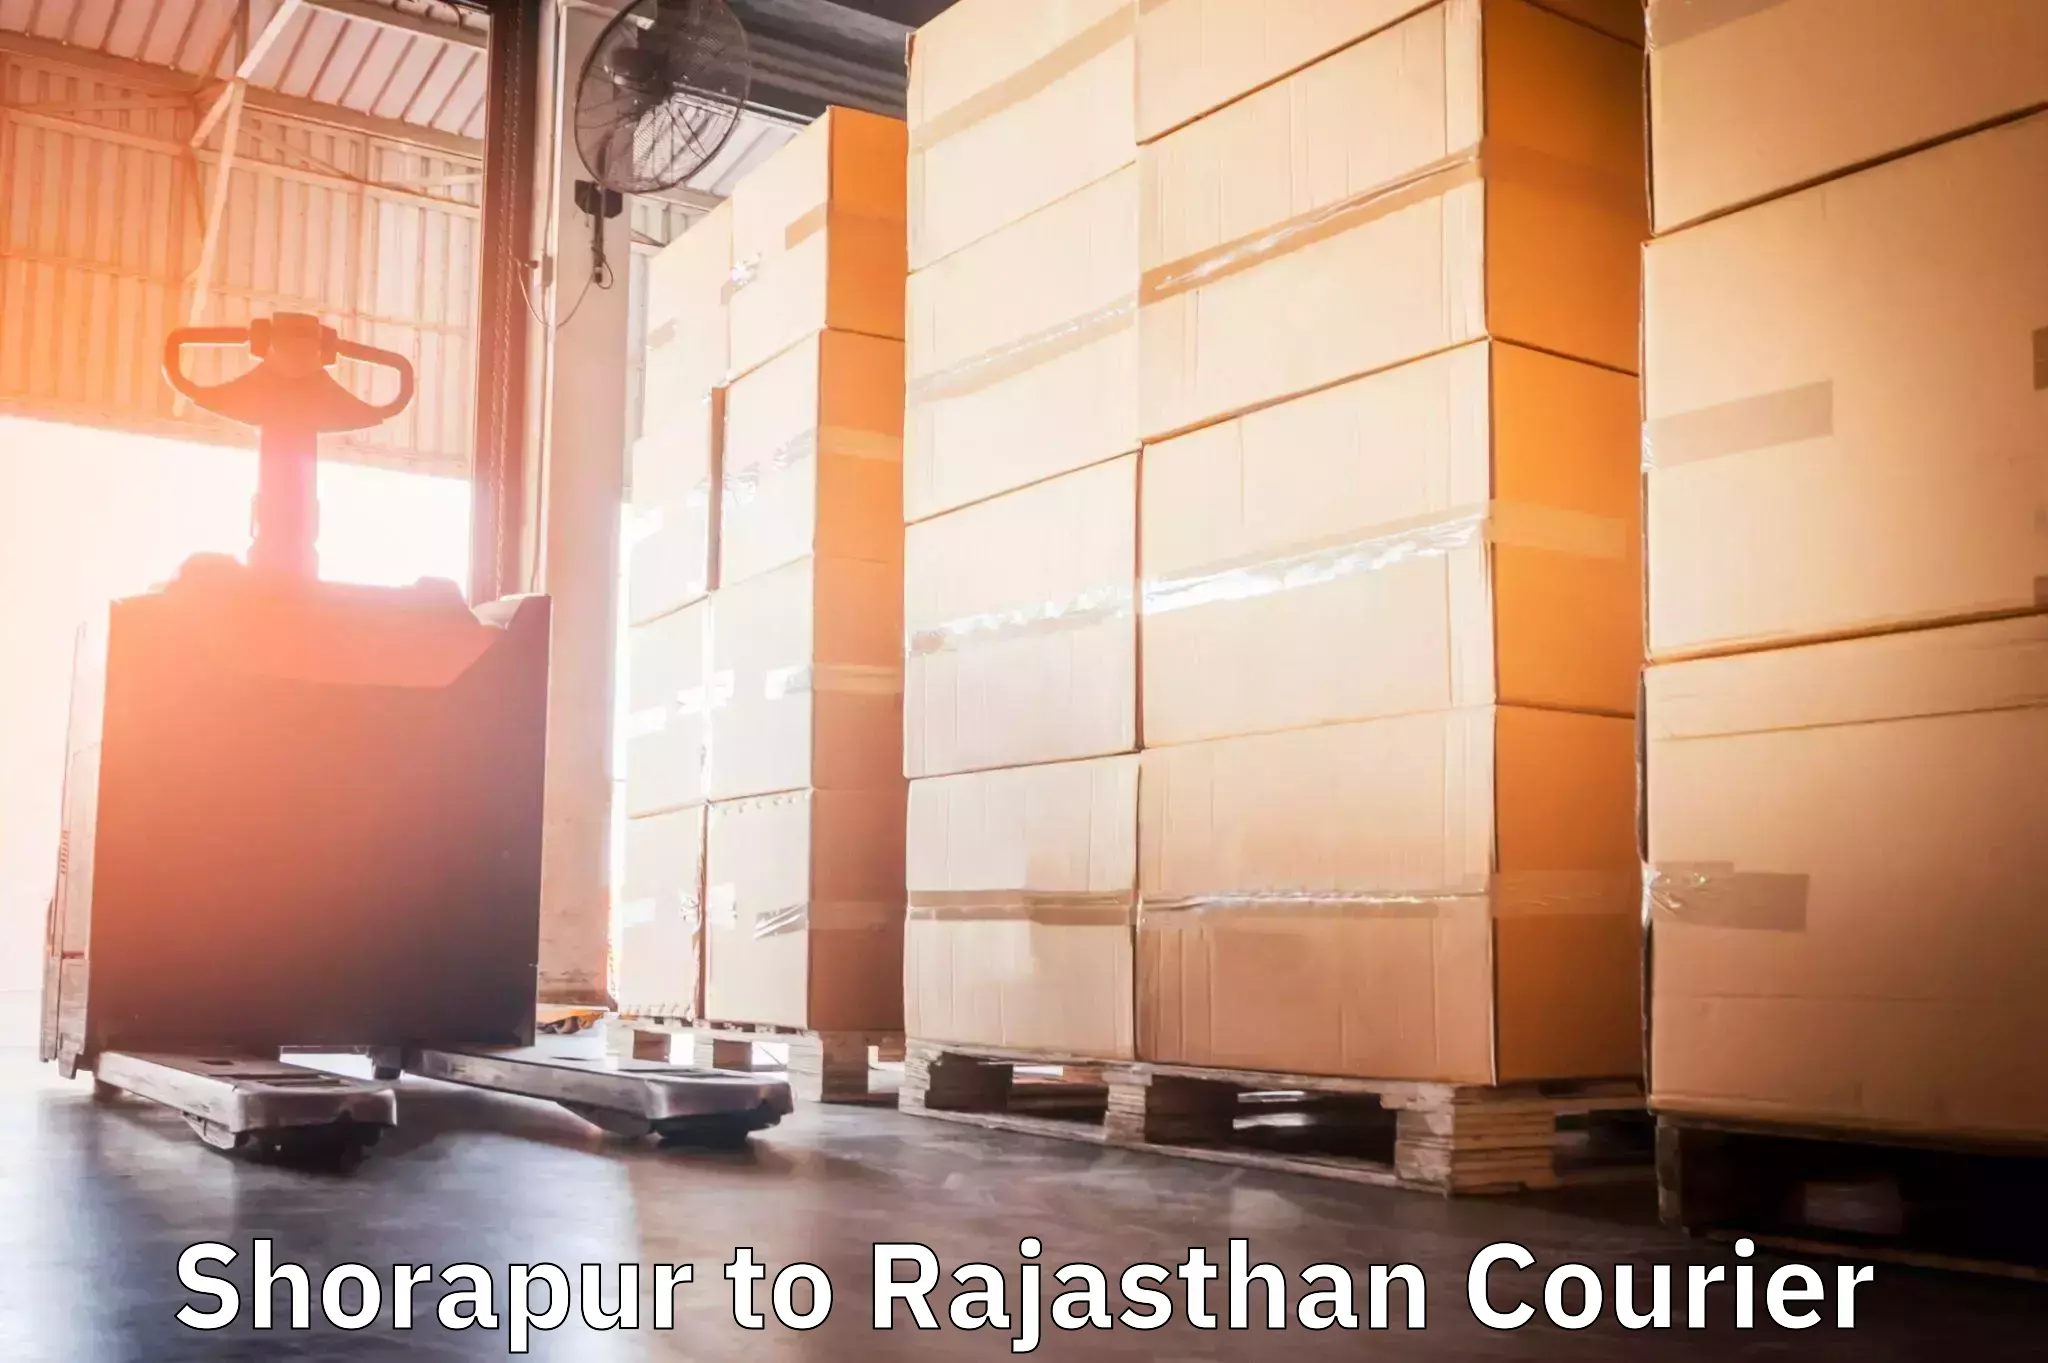 Courier service booking Shorapur to Rajasthan